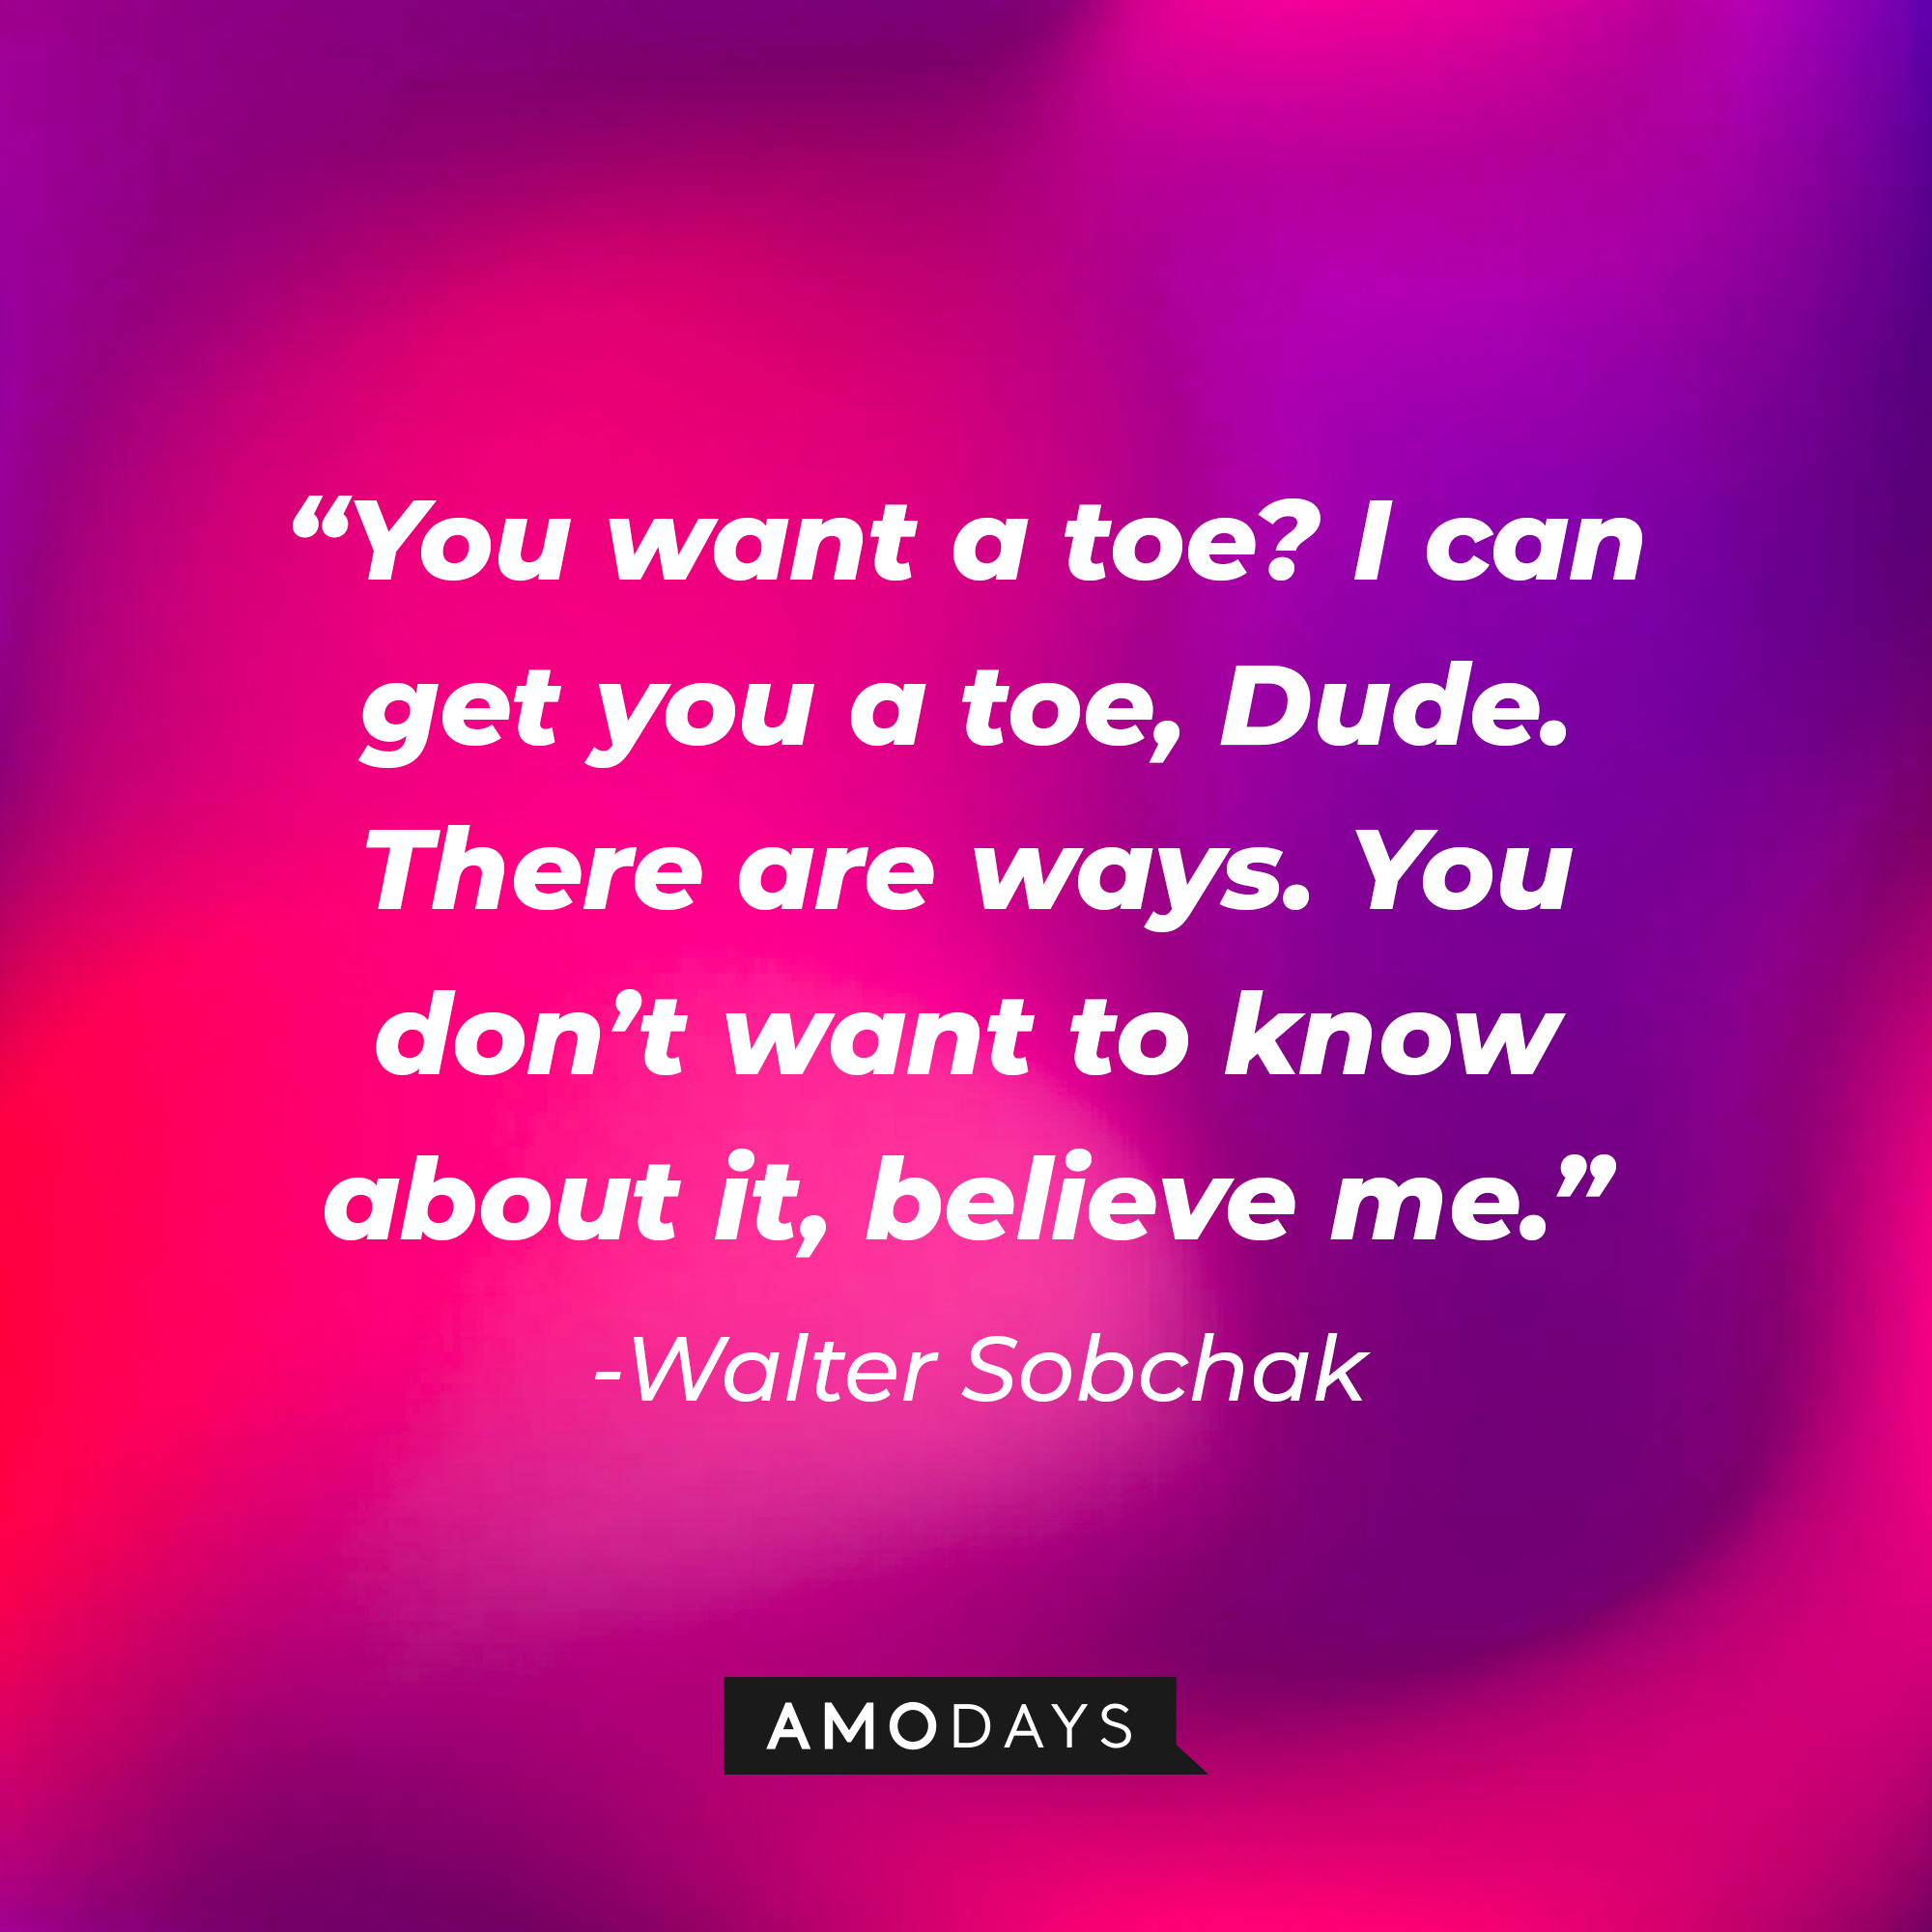 Walter Sobchak’s quote: “You want a toe? I can get you a toe, Dude. There are ways. You don’t want to know about it, believe me.” | Source: AmoDays